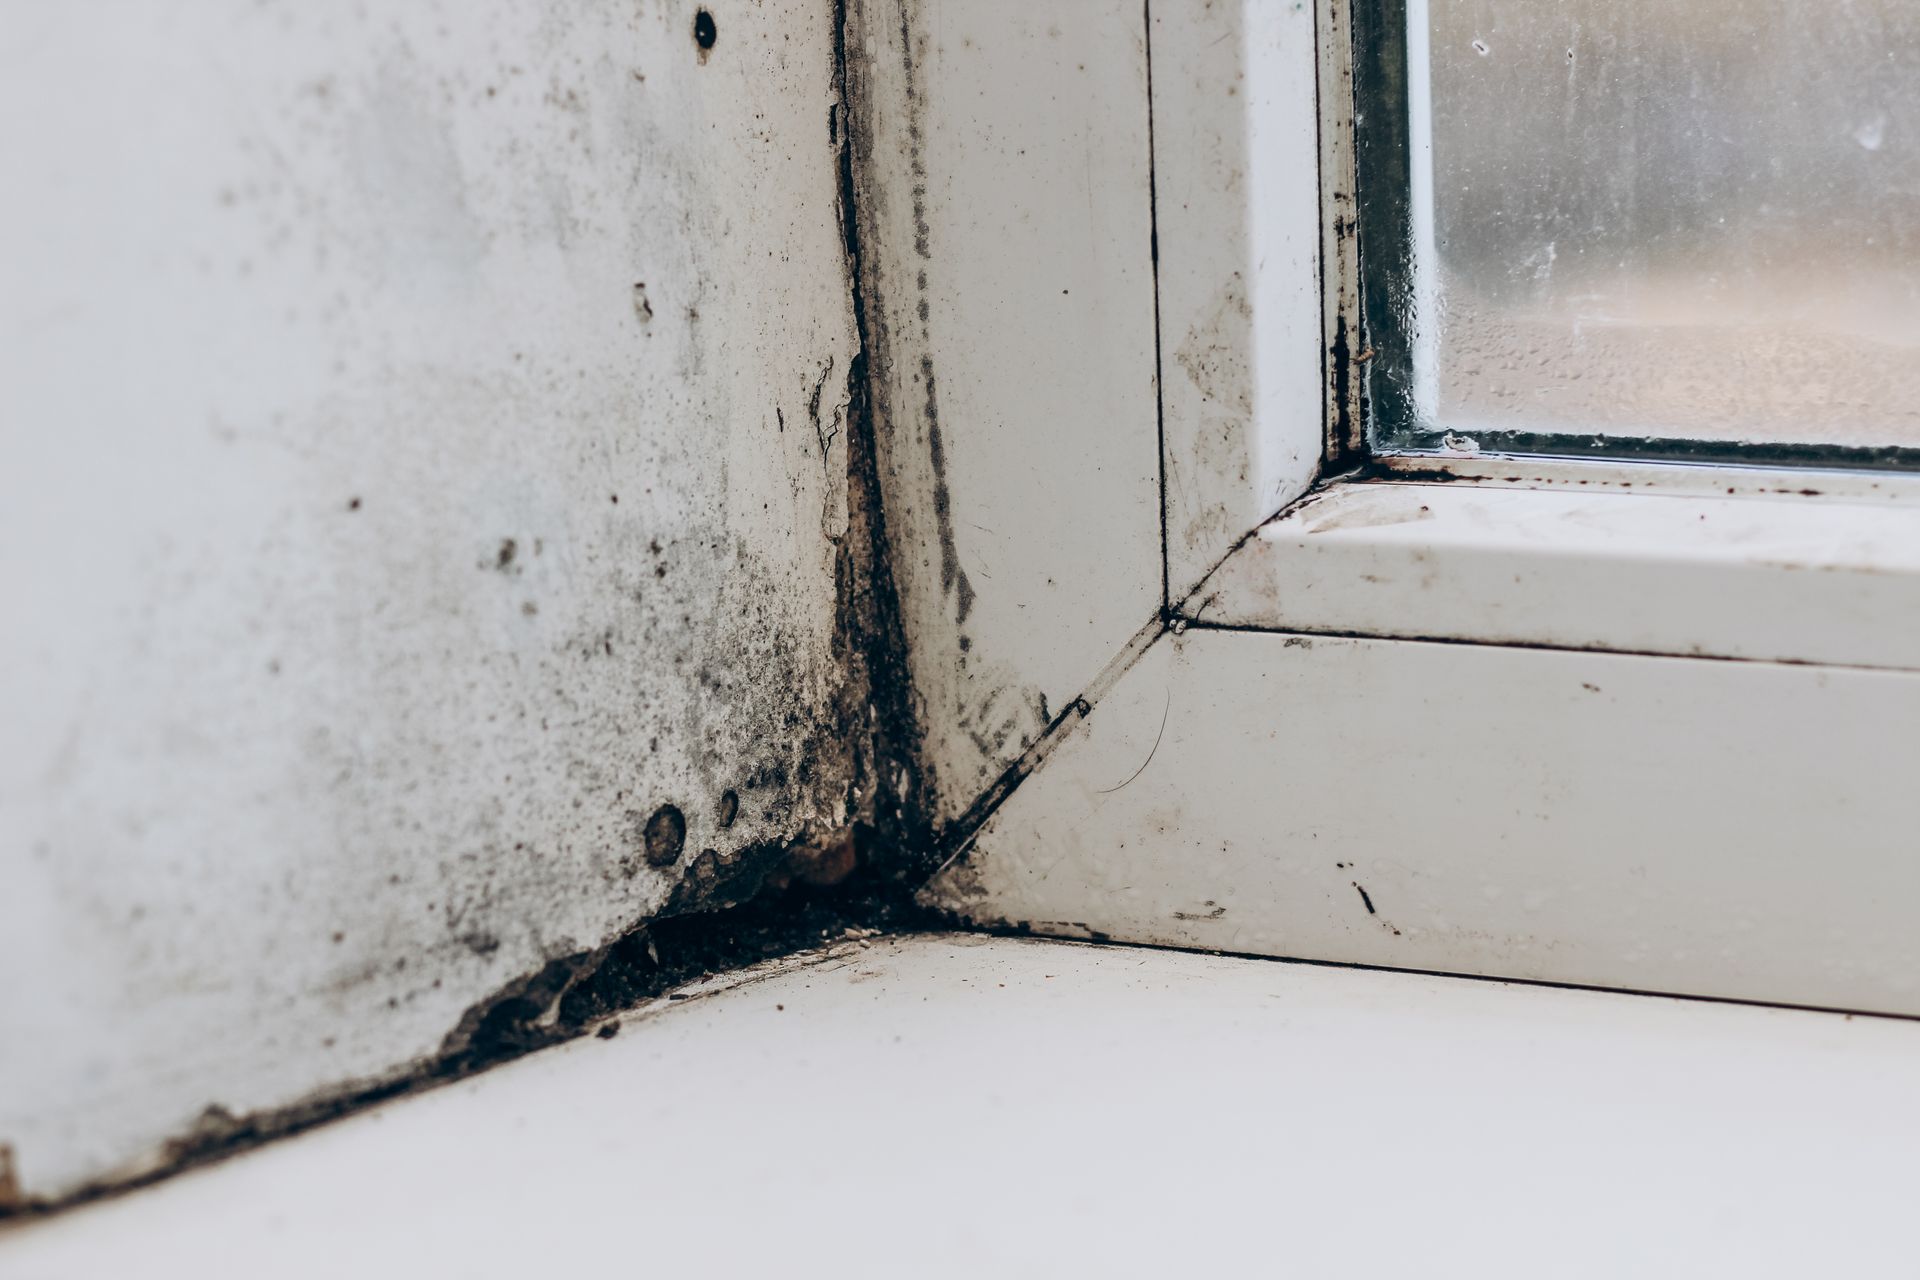 A close up of a window sill with mold growing on it.